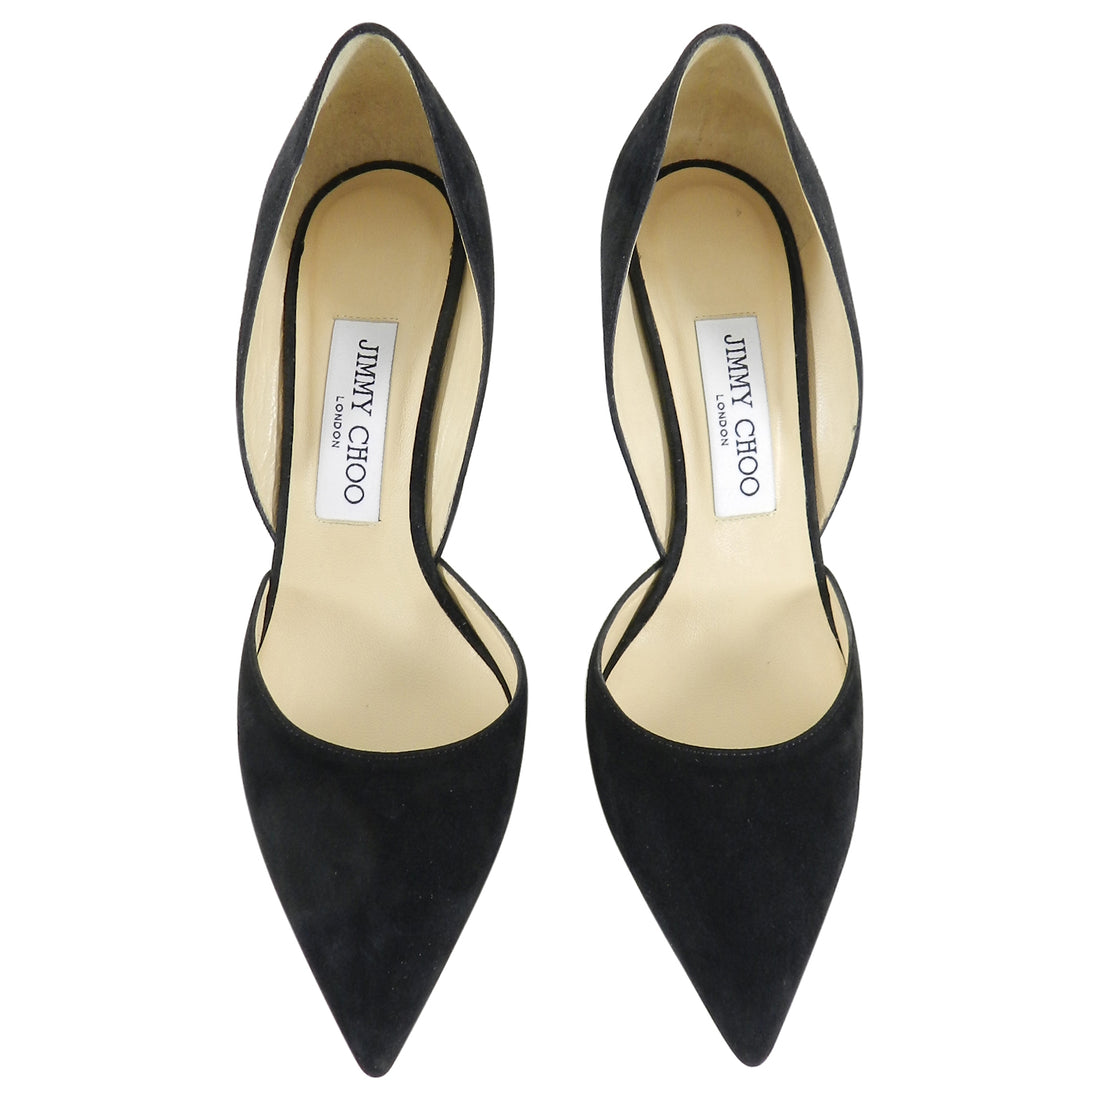 Jimmy Choo Black Suede Pumps with Gold Heel - 36.5